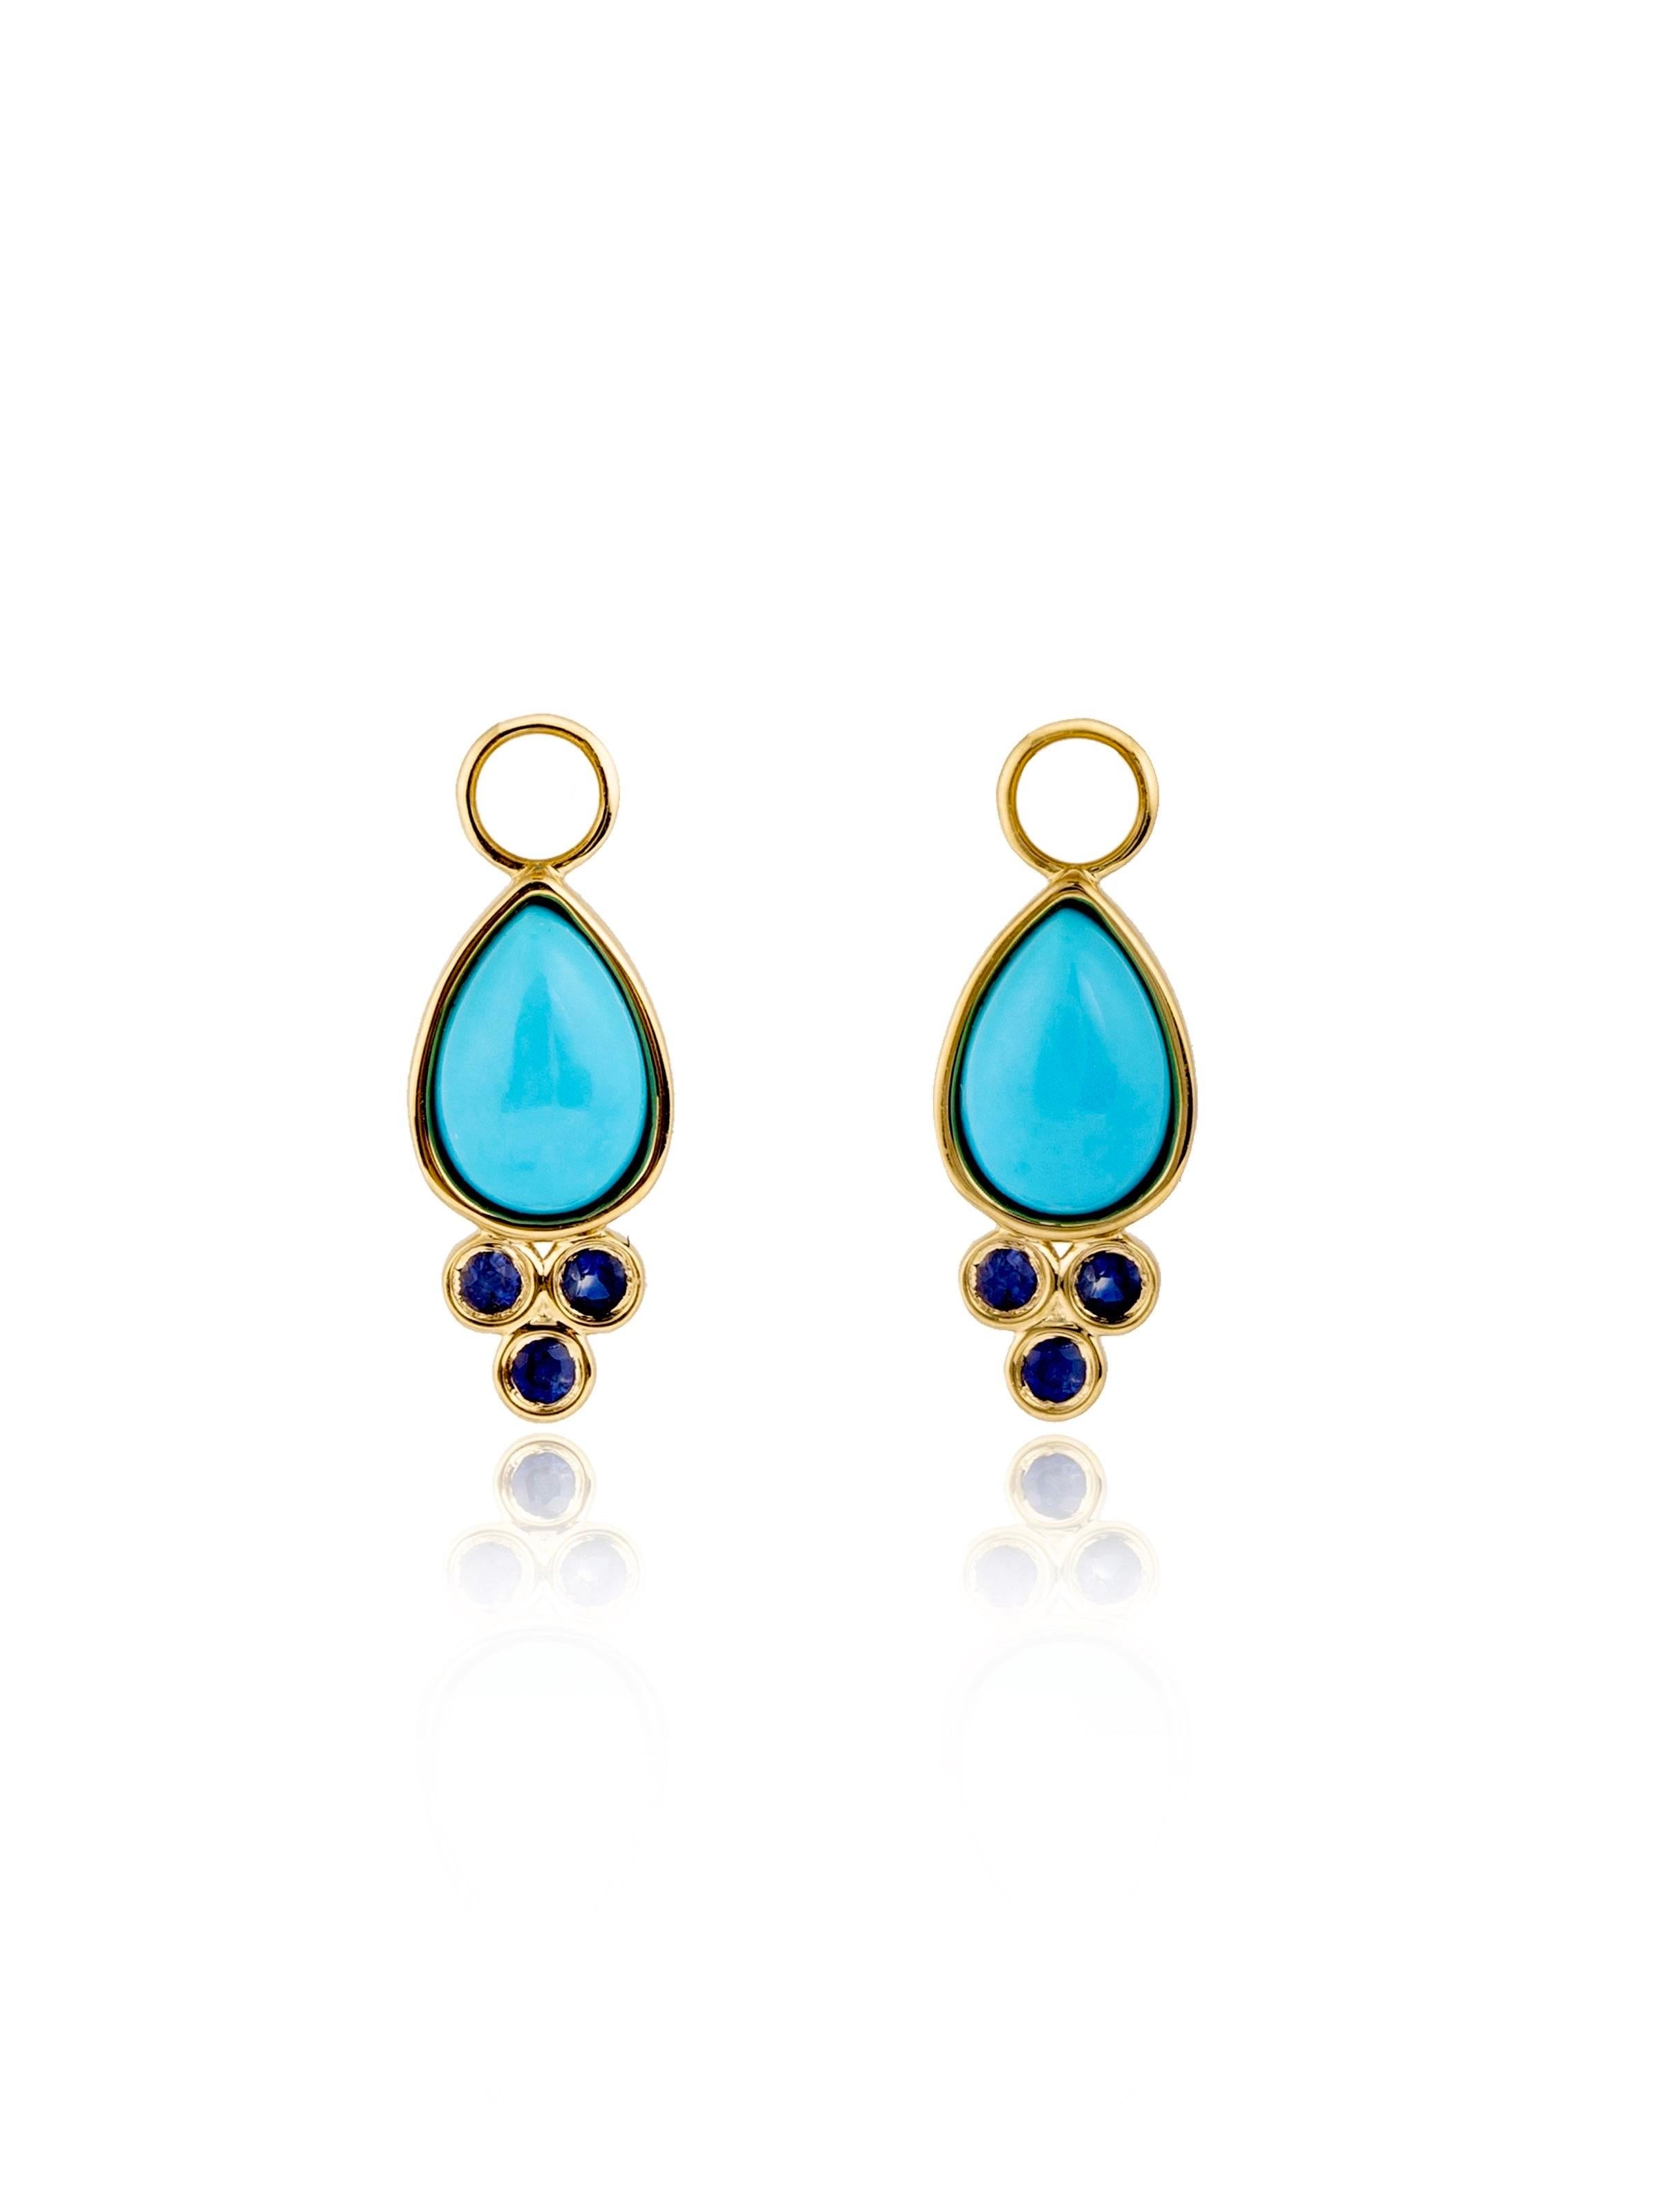 Pear Cut Nina Zhou Sapphire and Turquoise Double-sided Hoop Earrings with Drop Enhancers For Sale